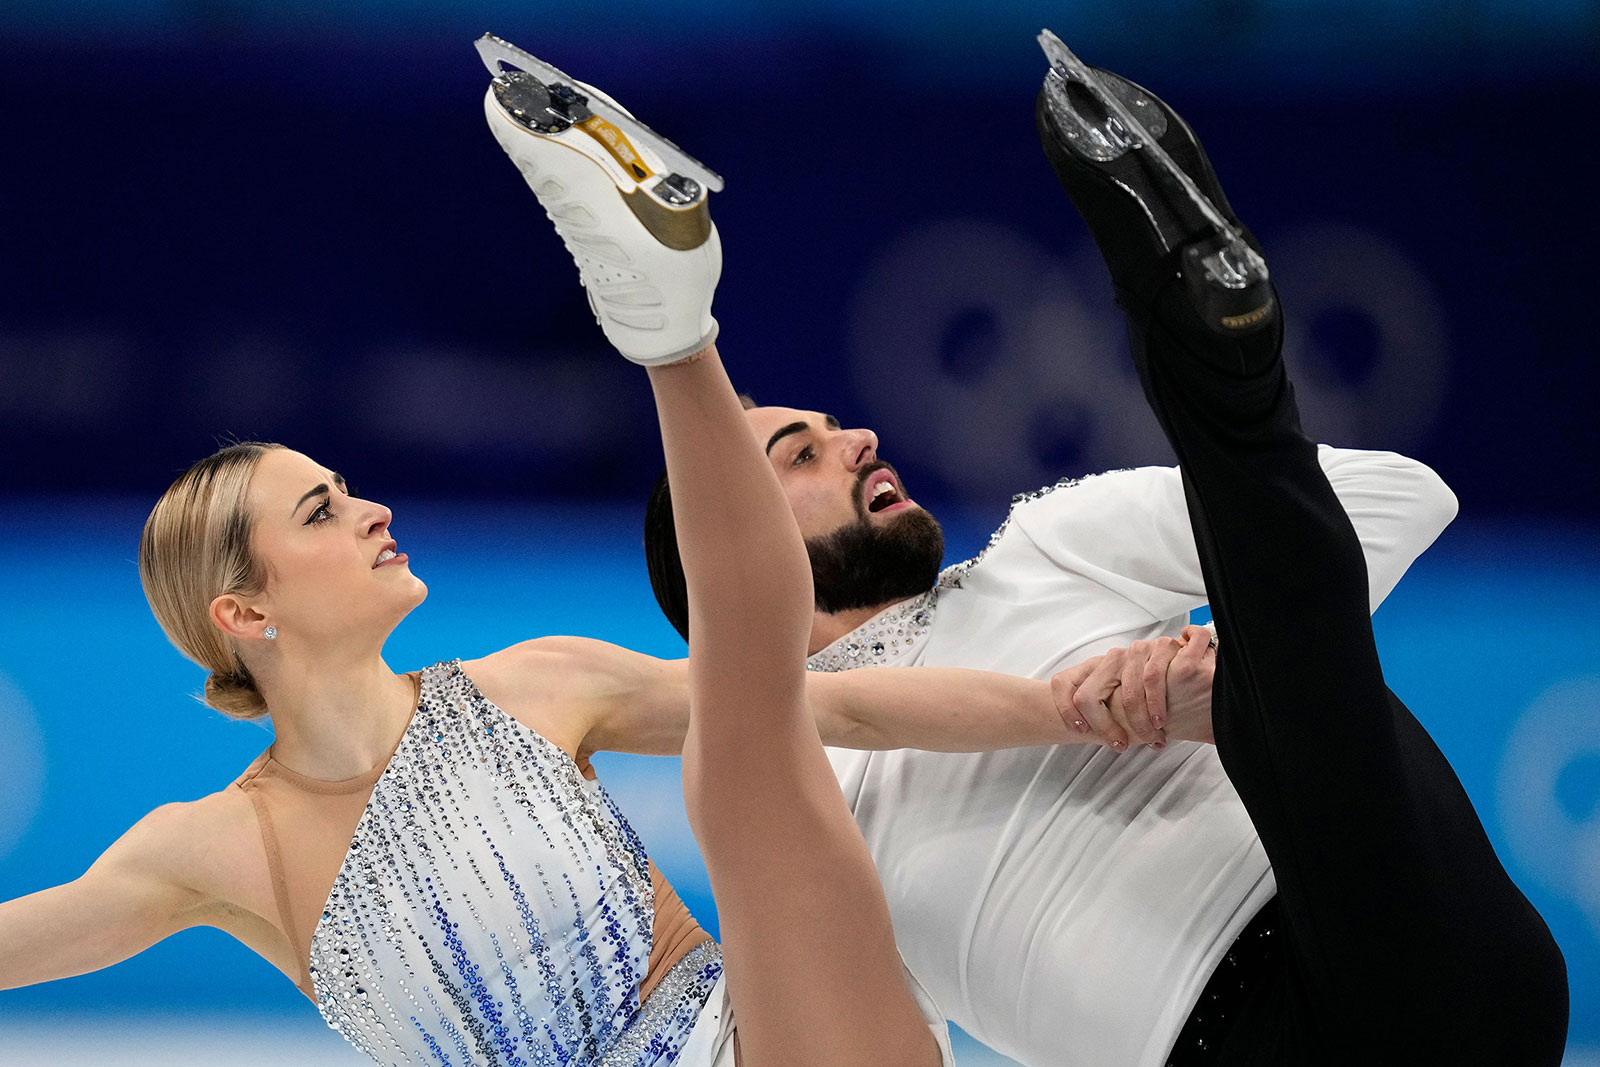 American figure skating duo Ashley Cain-Gribble and Timothy LeDuc skate in the pairs short program on February 18. LeDuc became the first openly nonbinary athlete to compete at the Winter Olympics.